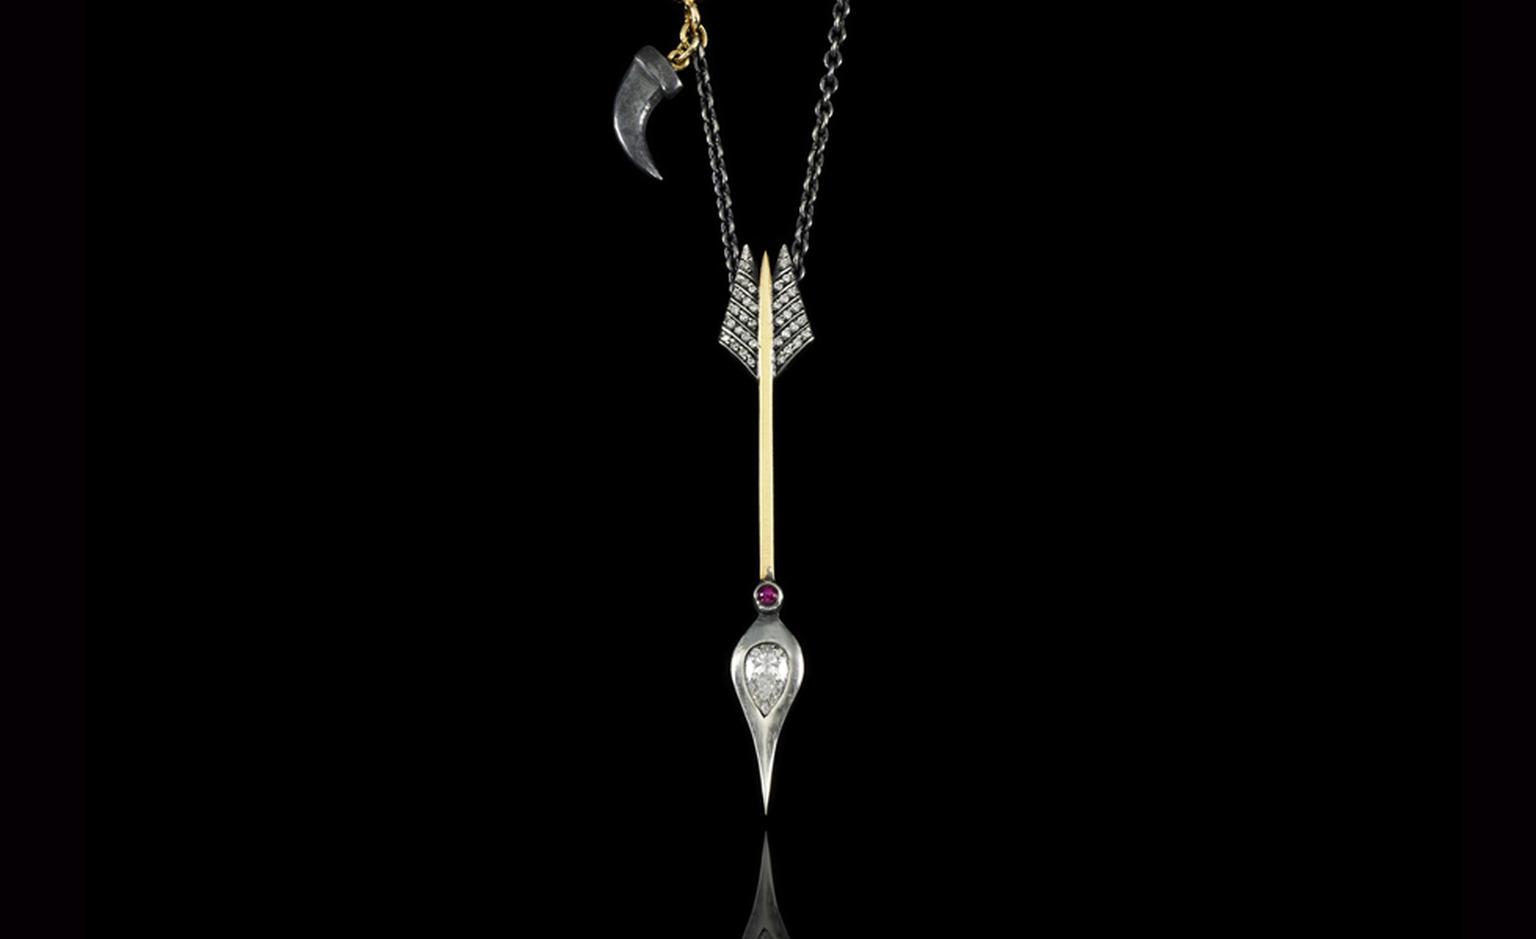 Jessica McCormack, ‘Anger’ diamond, ruby, 18k yellow gold and silver pendant necklace, from the XIV collection. Designed as an arrow, the head set at the centre with pear-shaped diamond weighing 0.58 carat, surmounted by a cabochon ruby, continu...